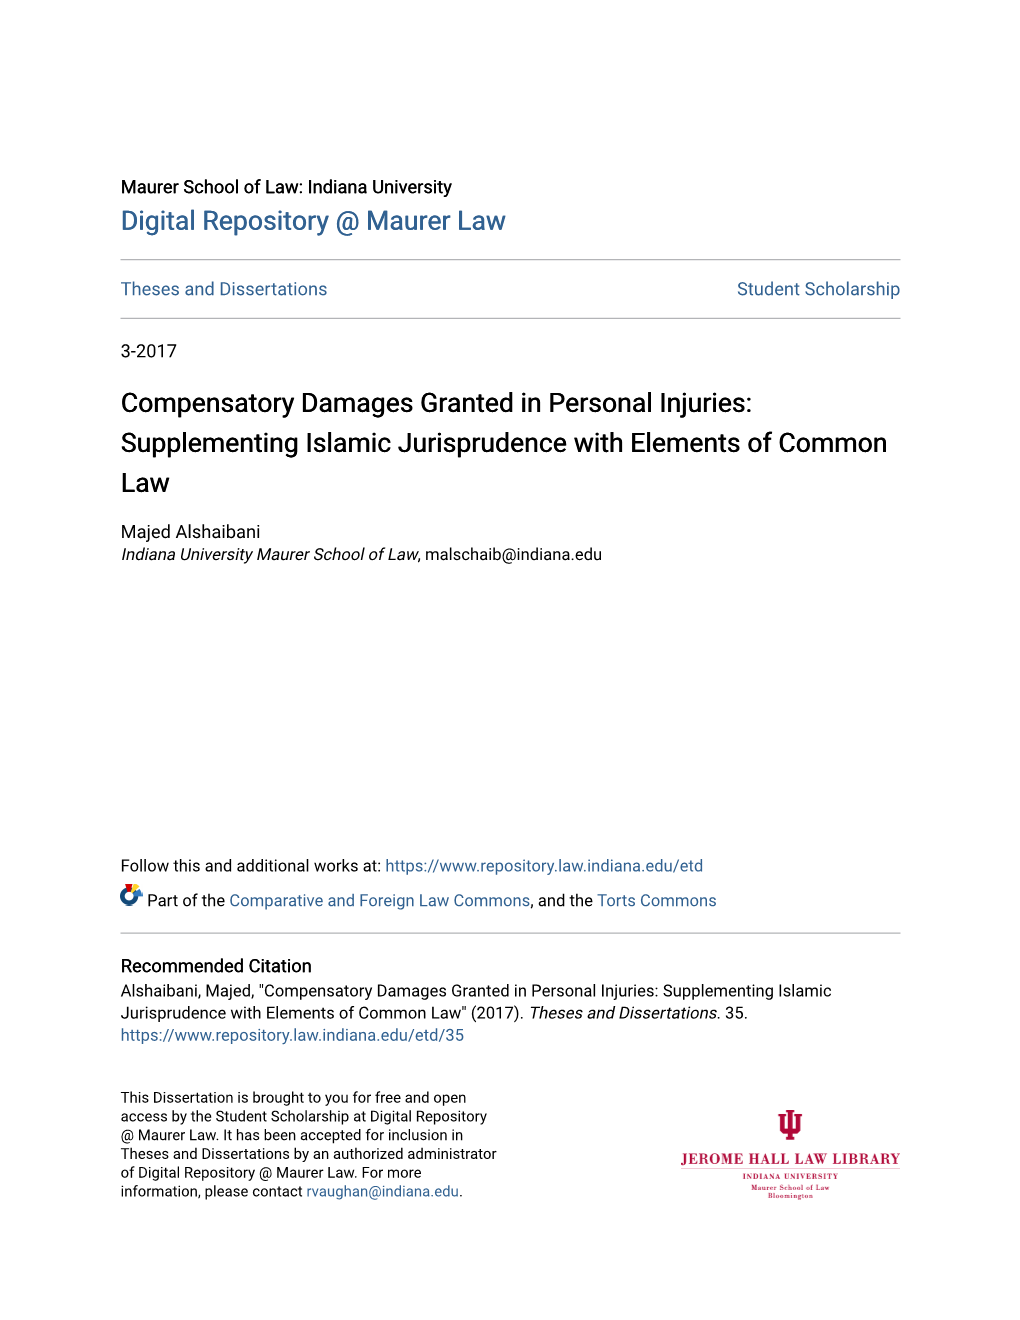 Compensatory Damages Granted in Personal Injuries: Supplementing Islamic Jurisprudence with Elements of Common Law